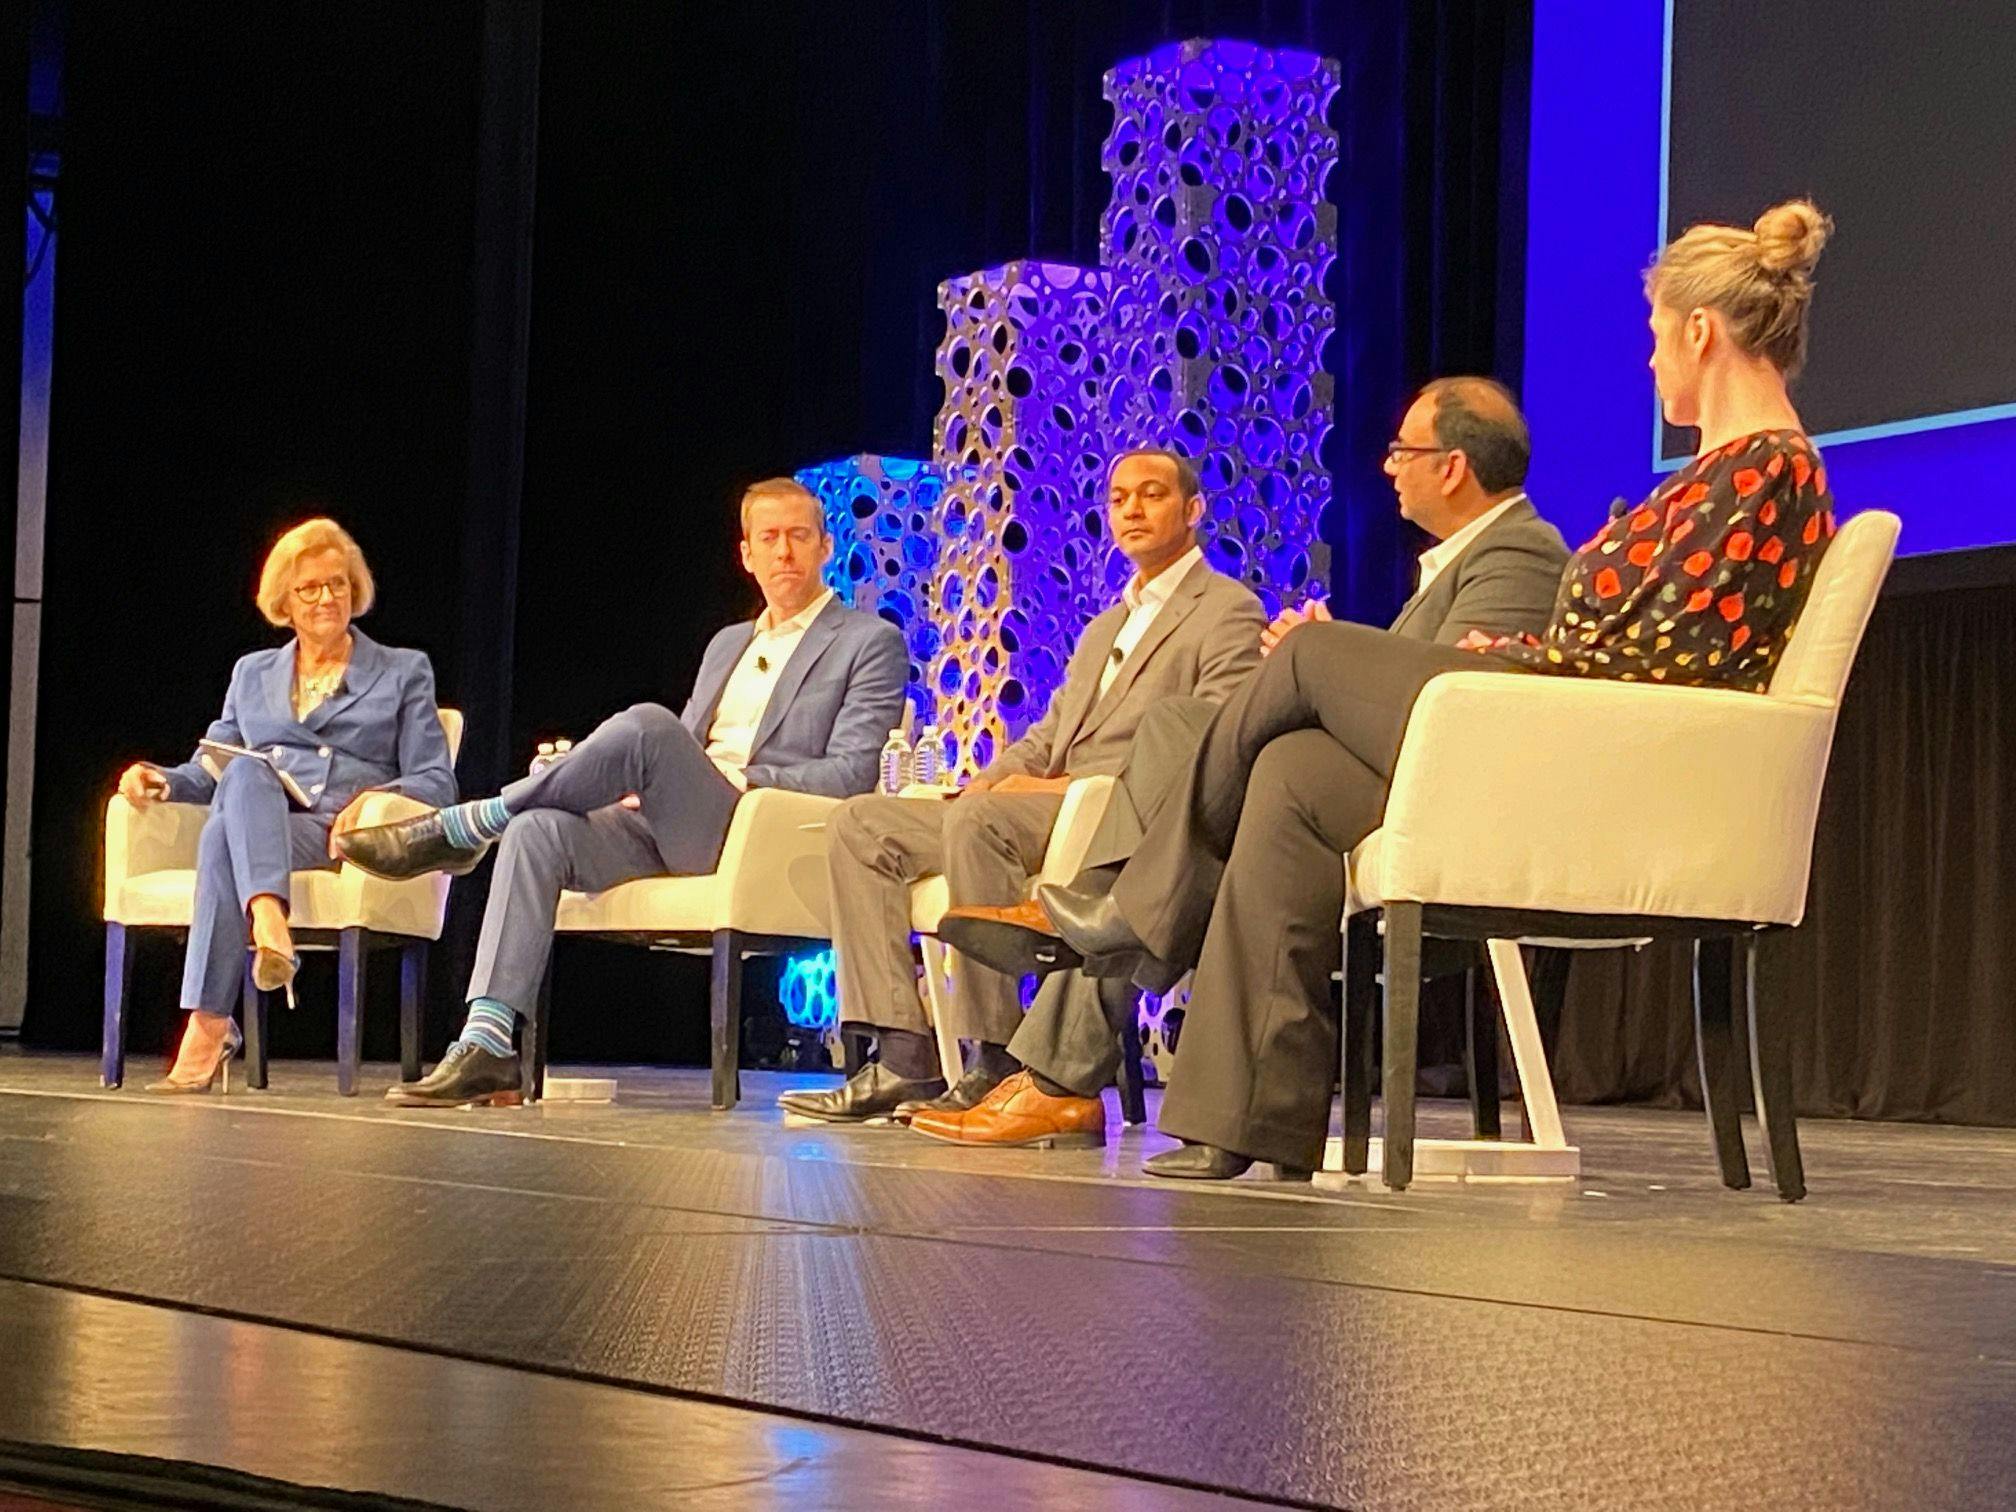 A panel discussion on the digital transformation of healthcare at the HIMSS 2022 Conference. 